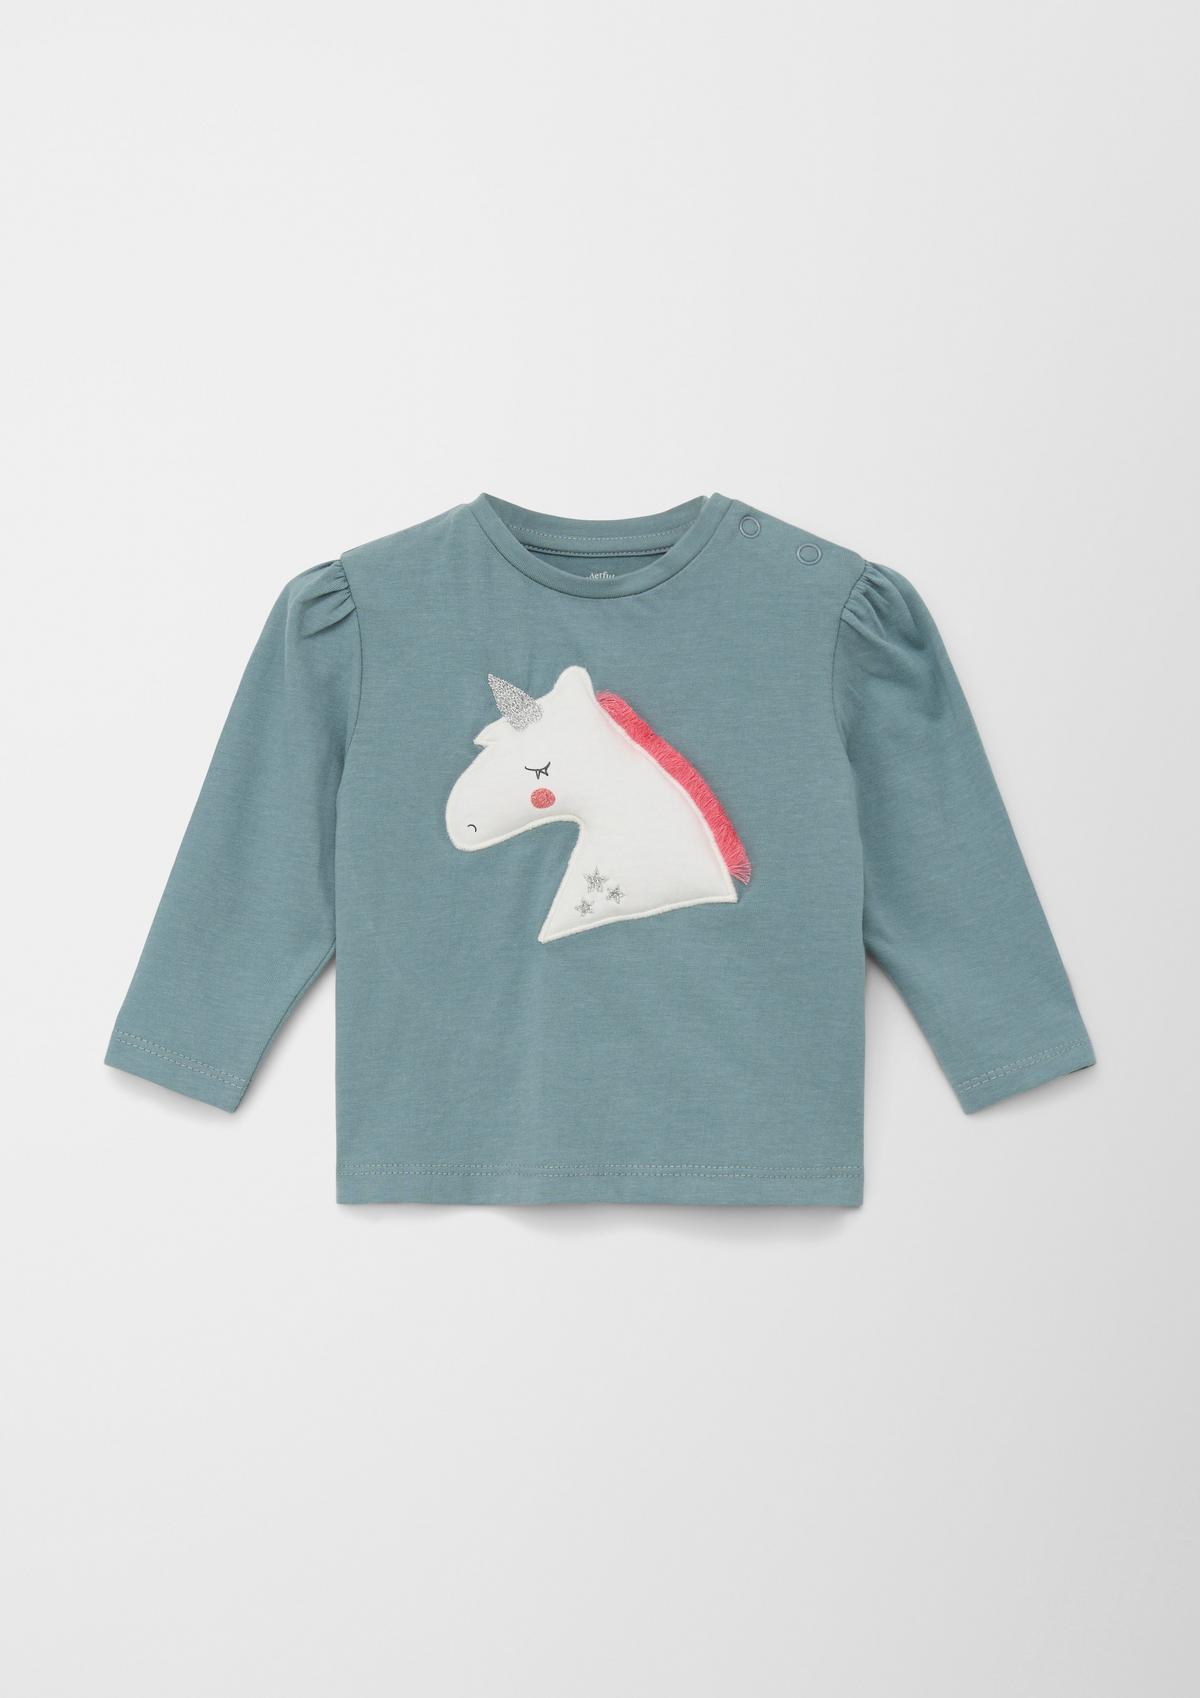 s.Oliver Long sleeve top with a unicorn appliqué